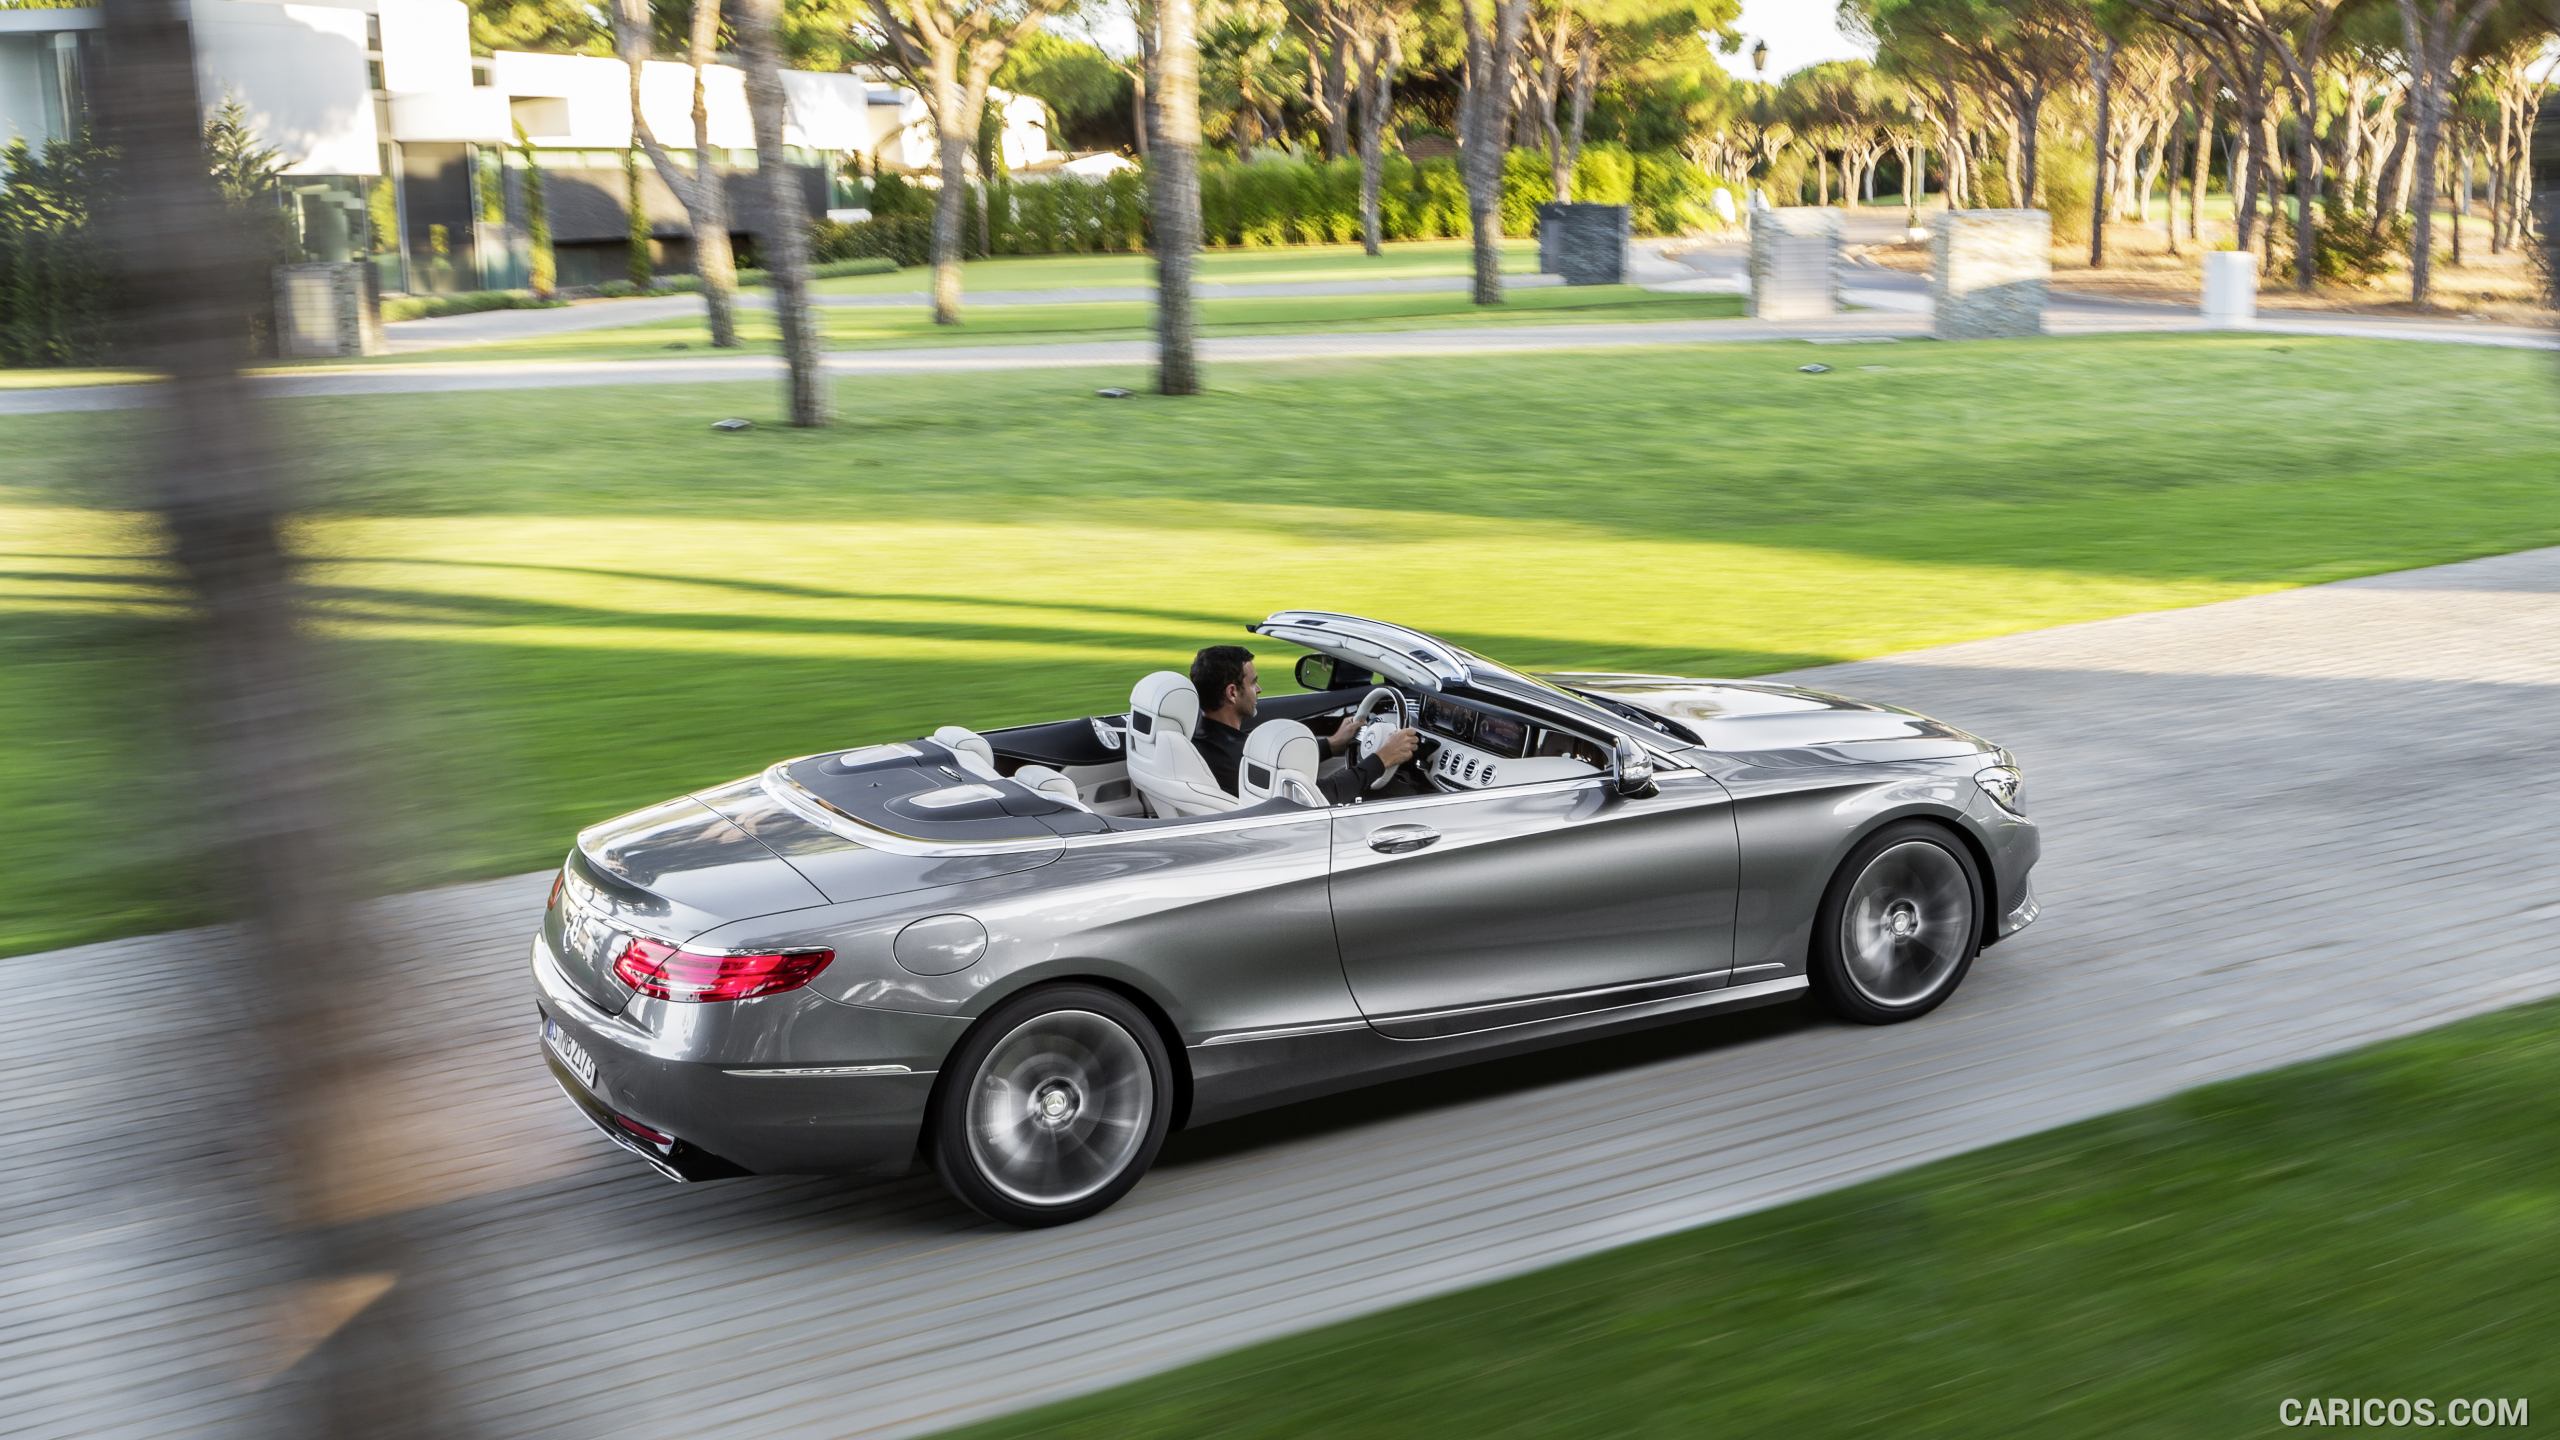 2017 Mercedes-Benz S-Class S500 Cabriolet (Selenit Grey) - Side, #3 of 56